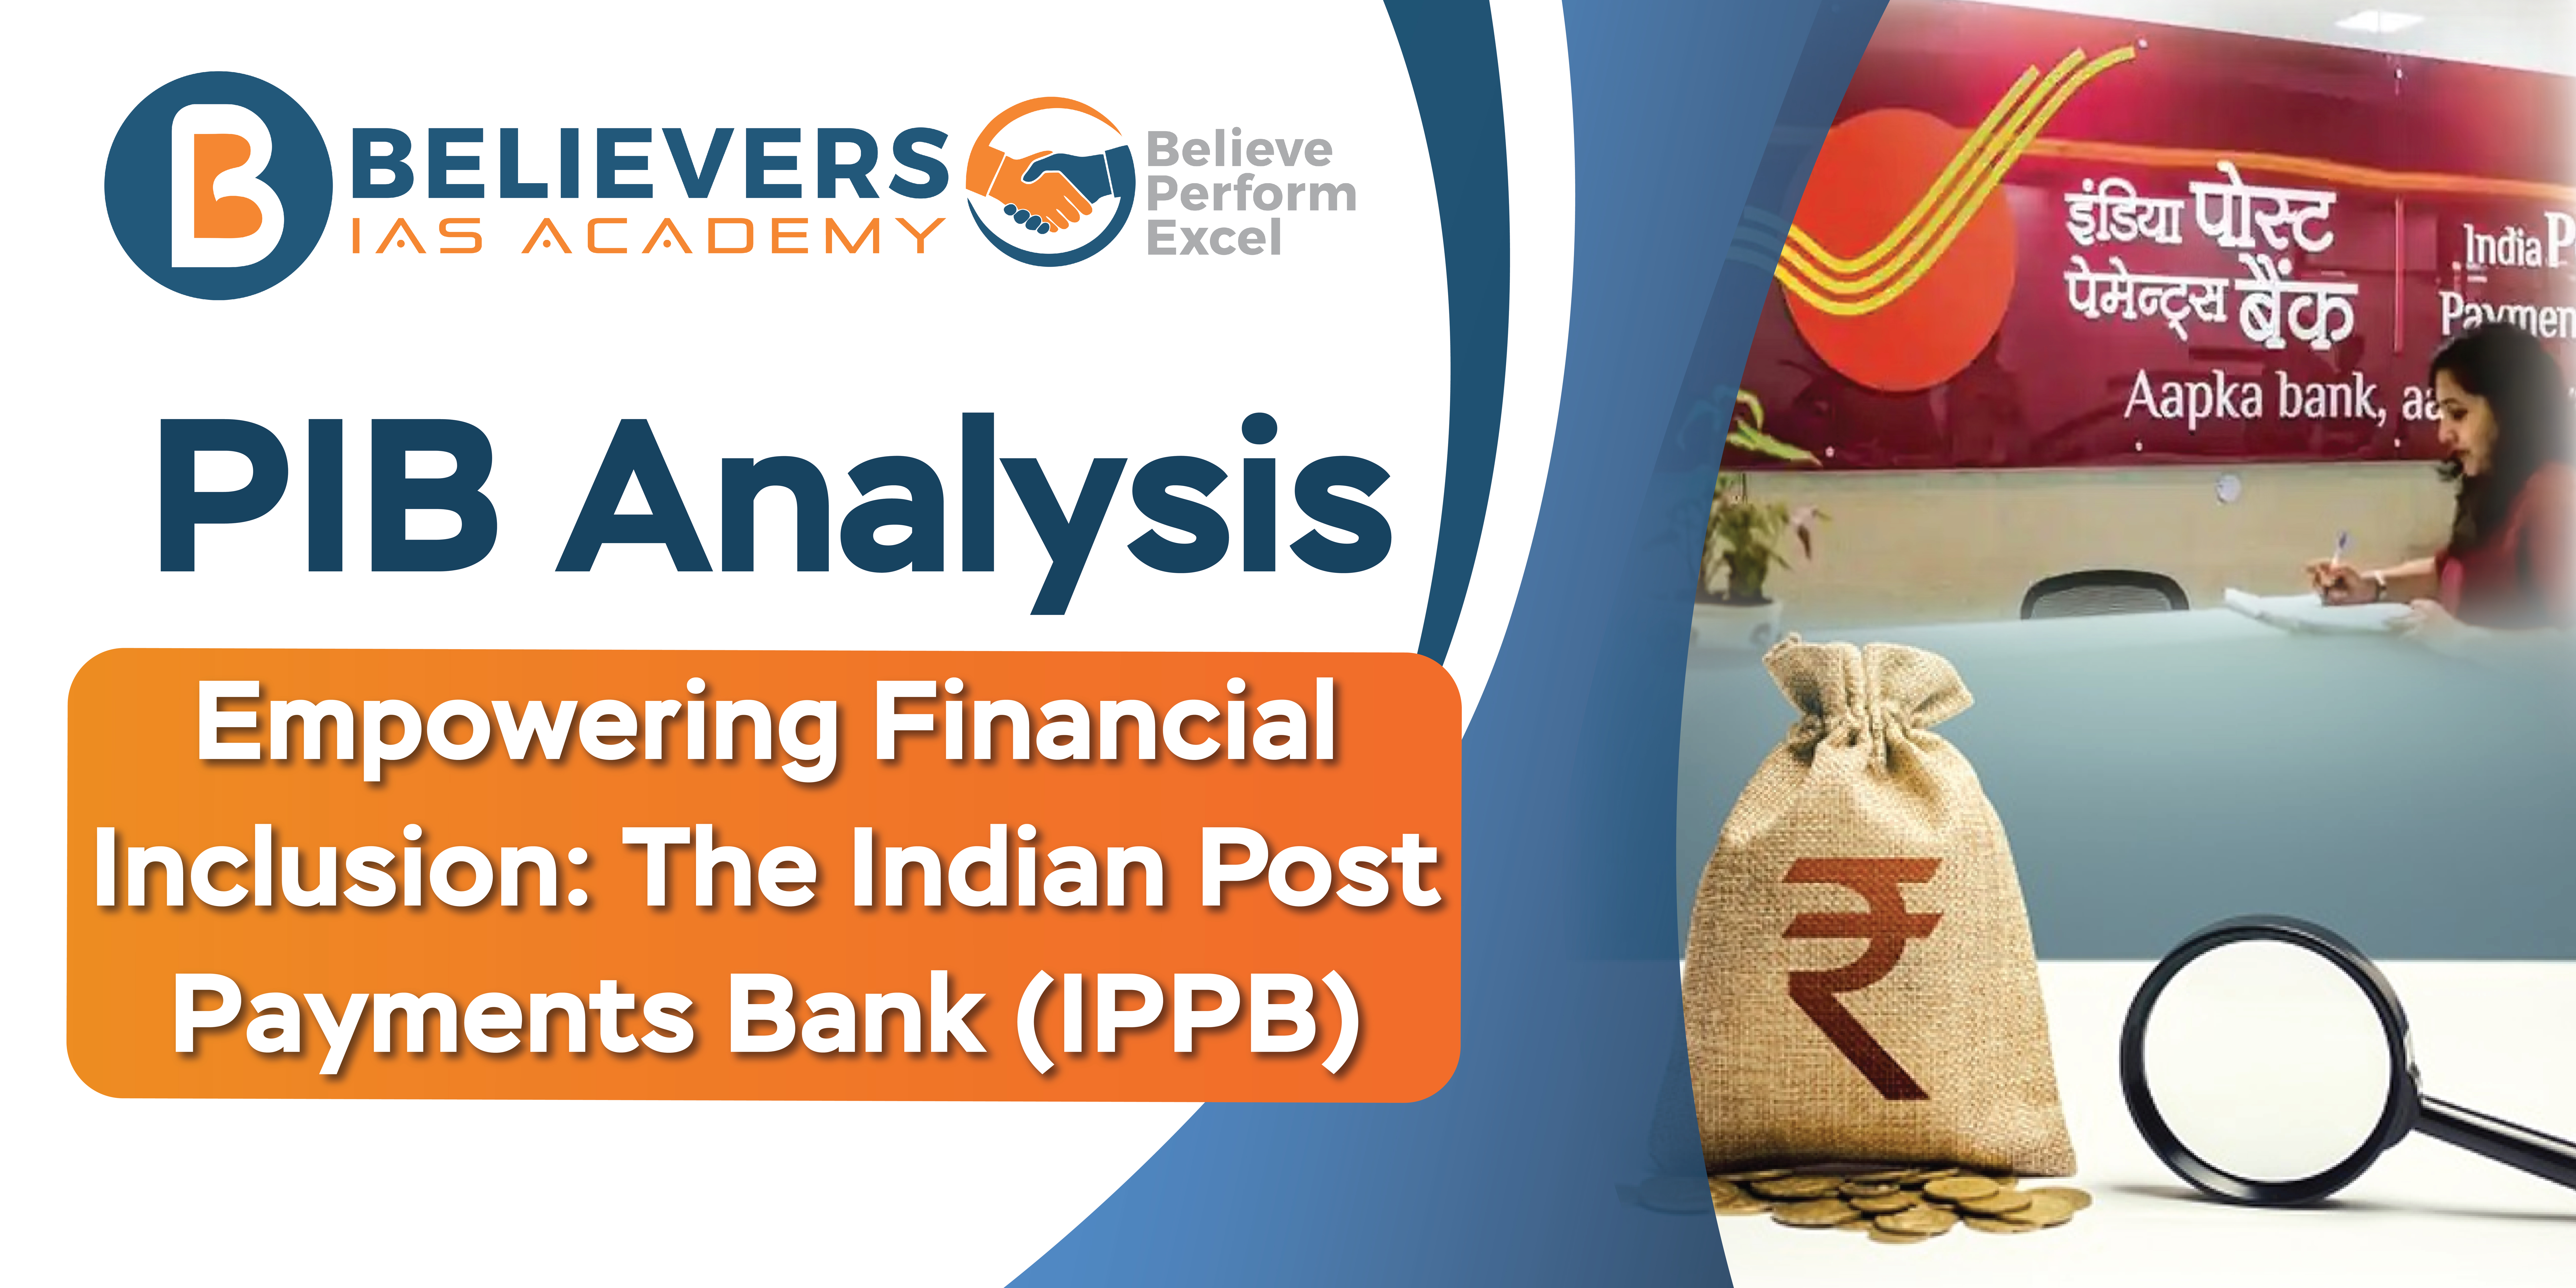 Empowering Financial Inclusion: The Indian Post Payments Bank (IPPB)